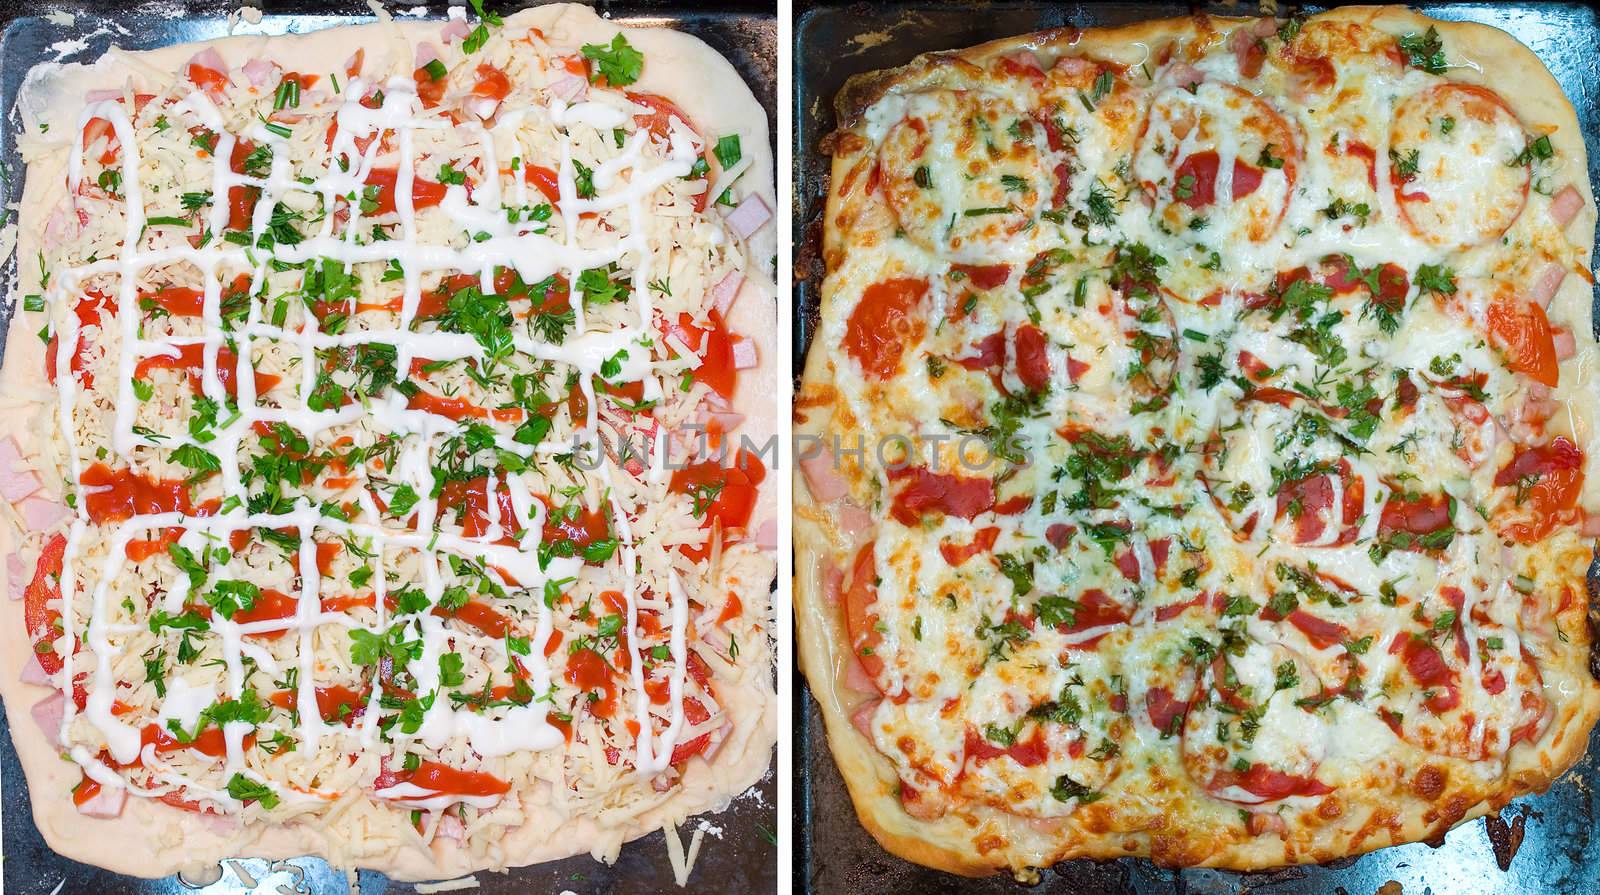 pizza before and after bake by Alekcey